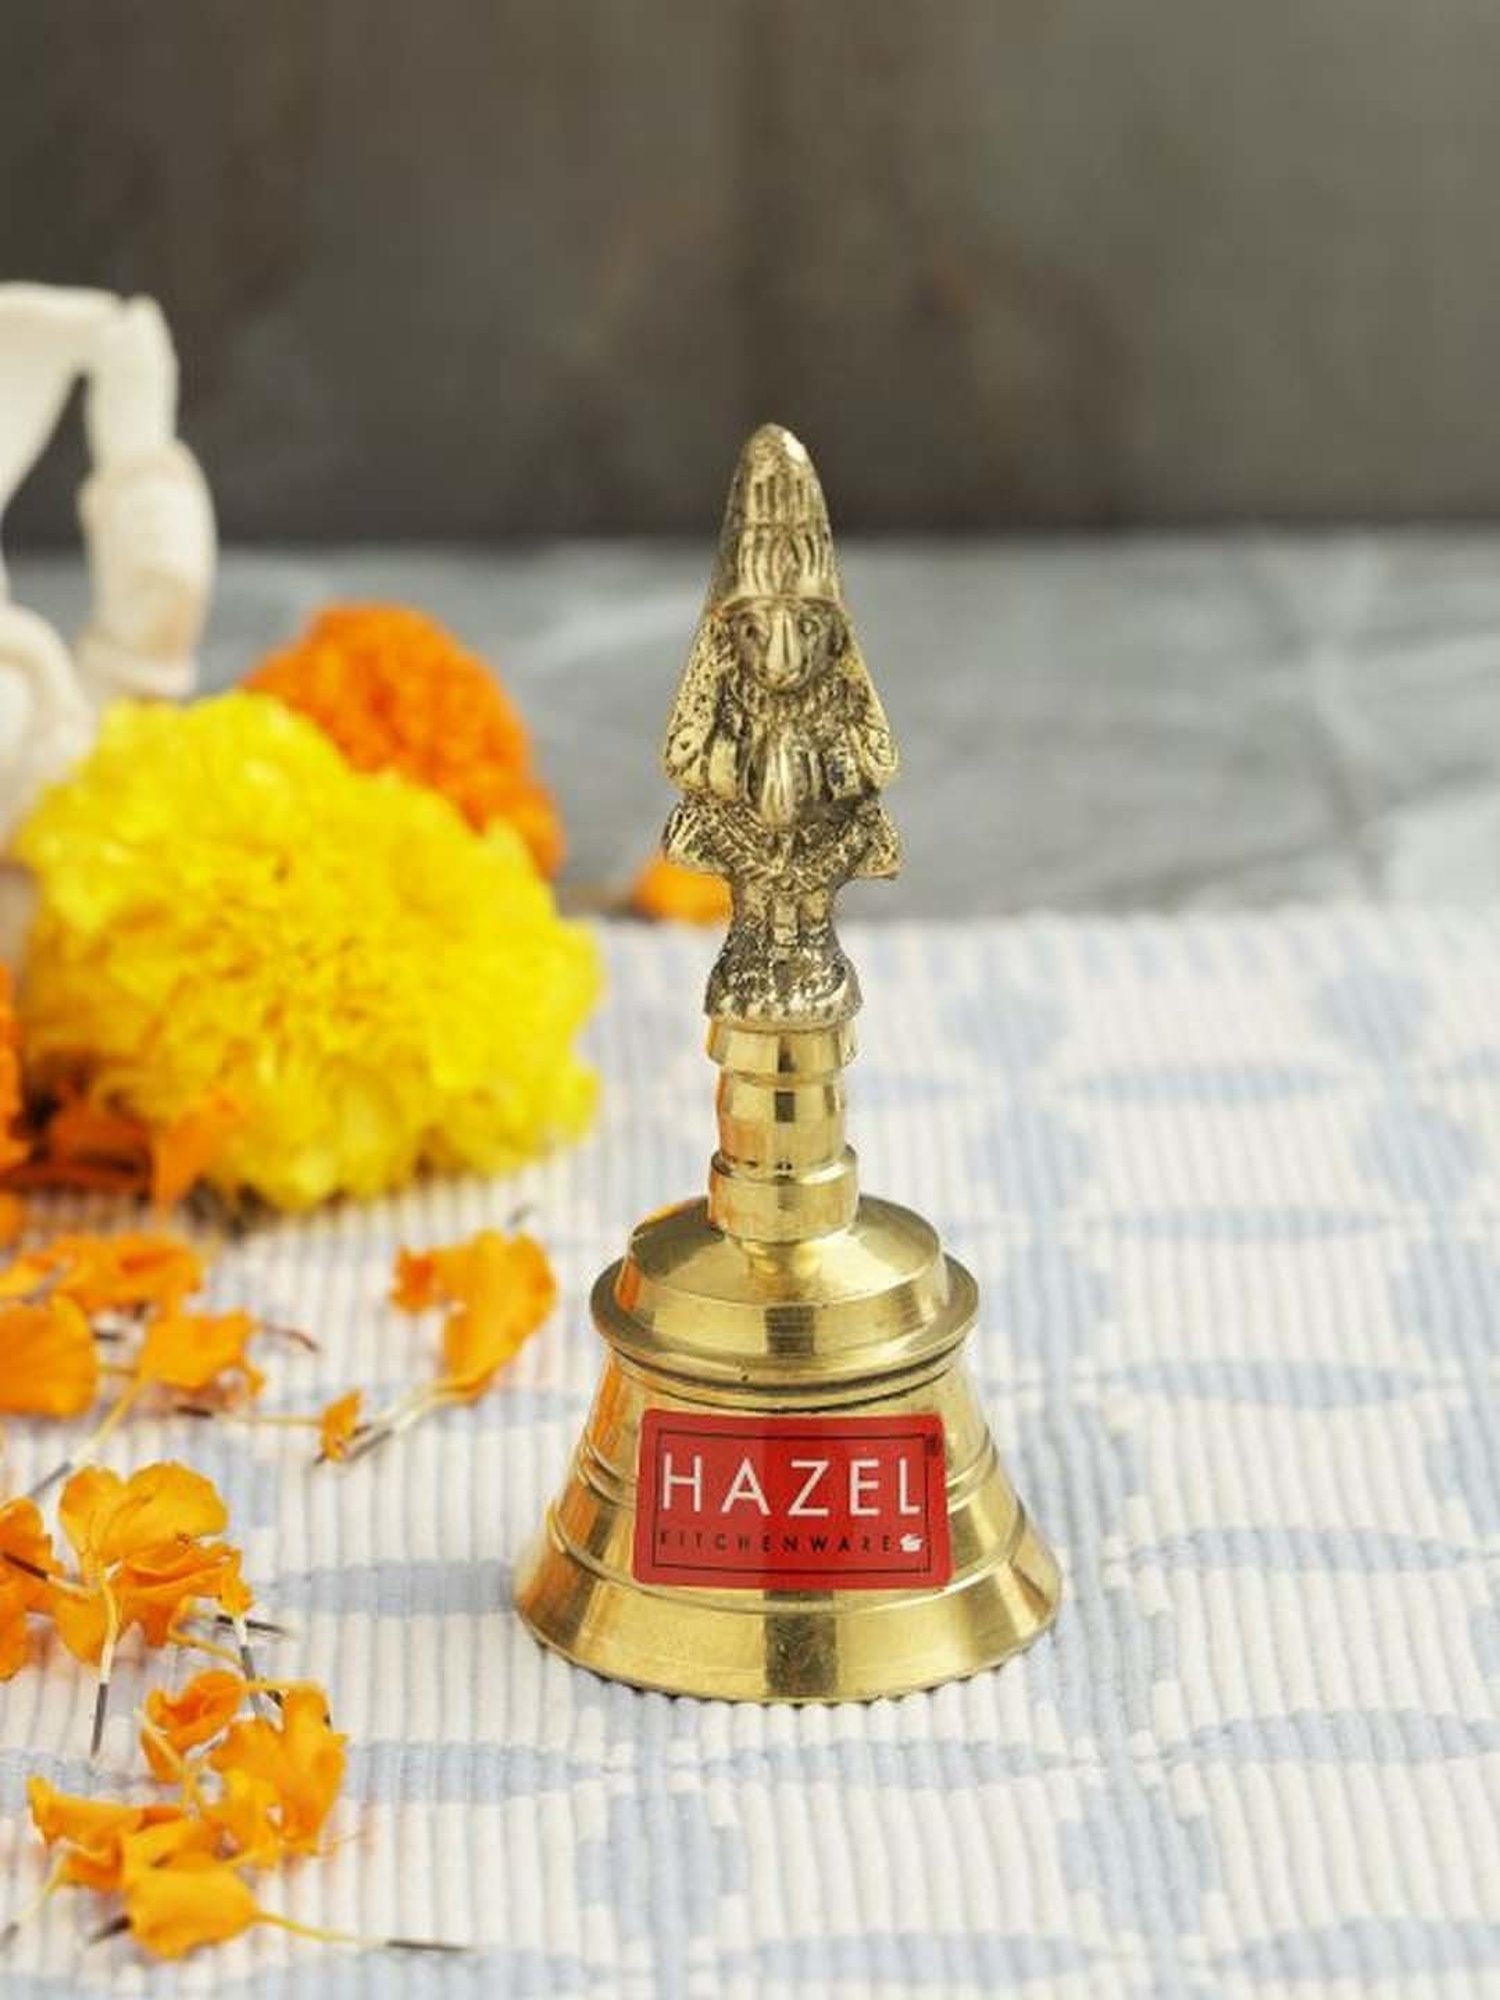 Ethnic Solid Brass Bell For Puja Room